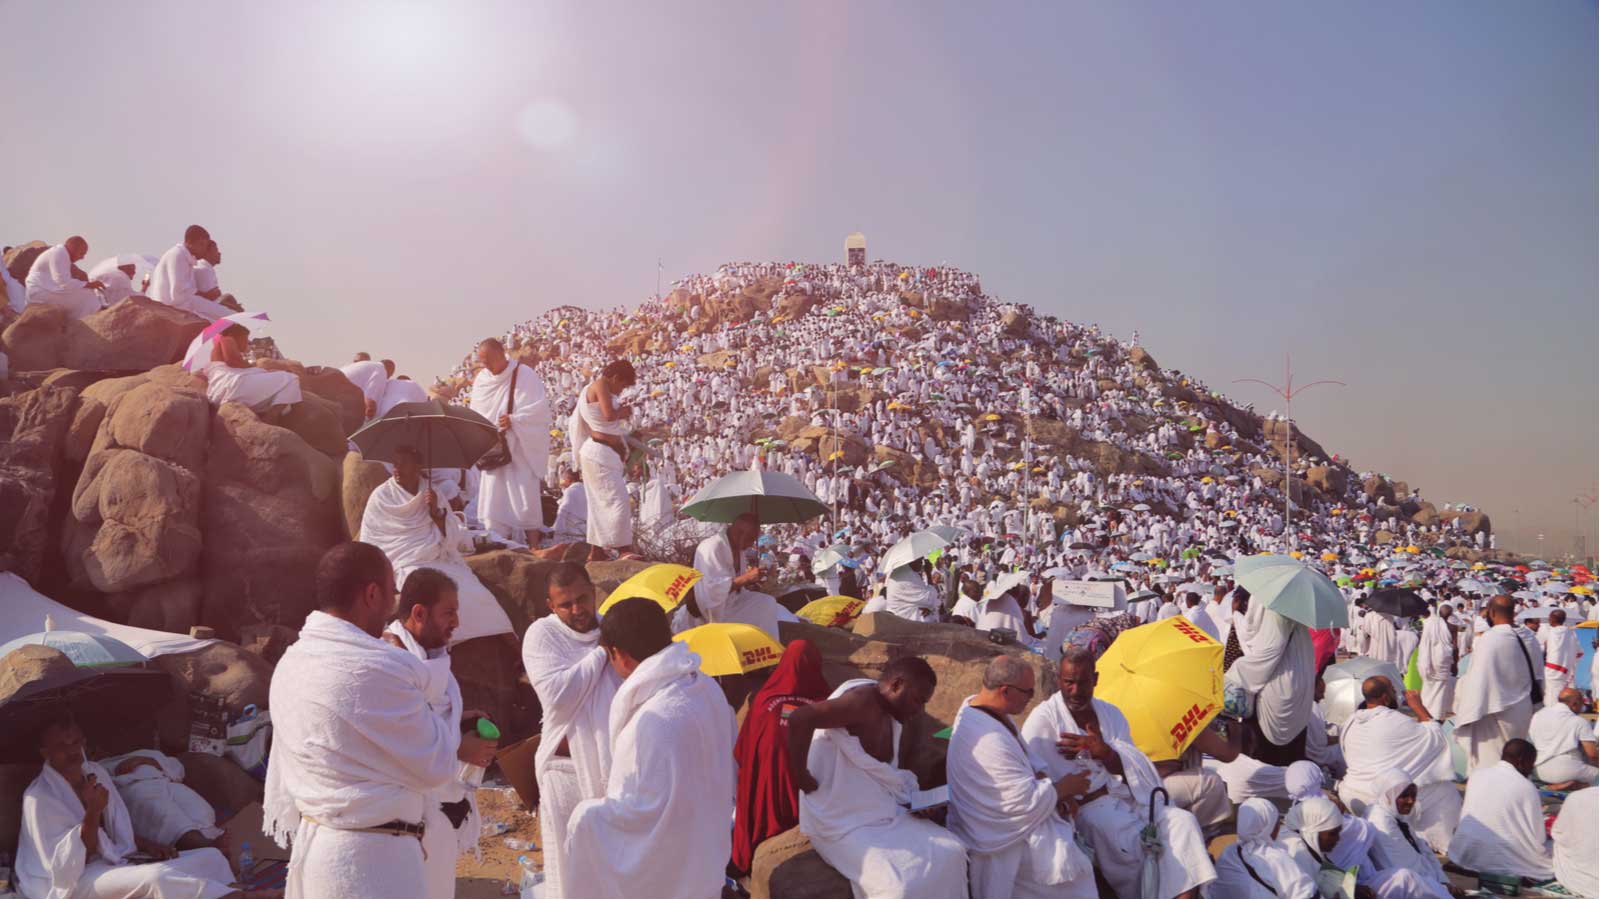 Spending day of Arafah with doa